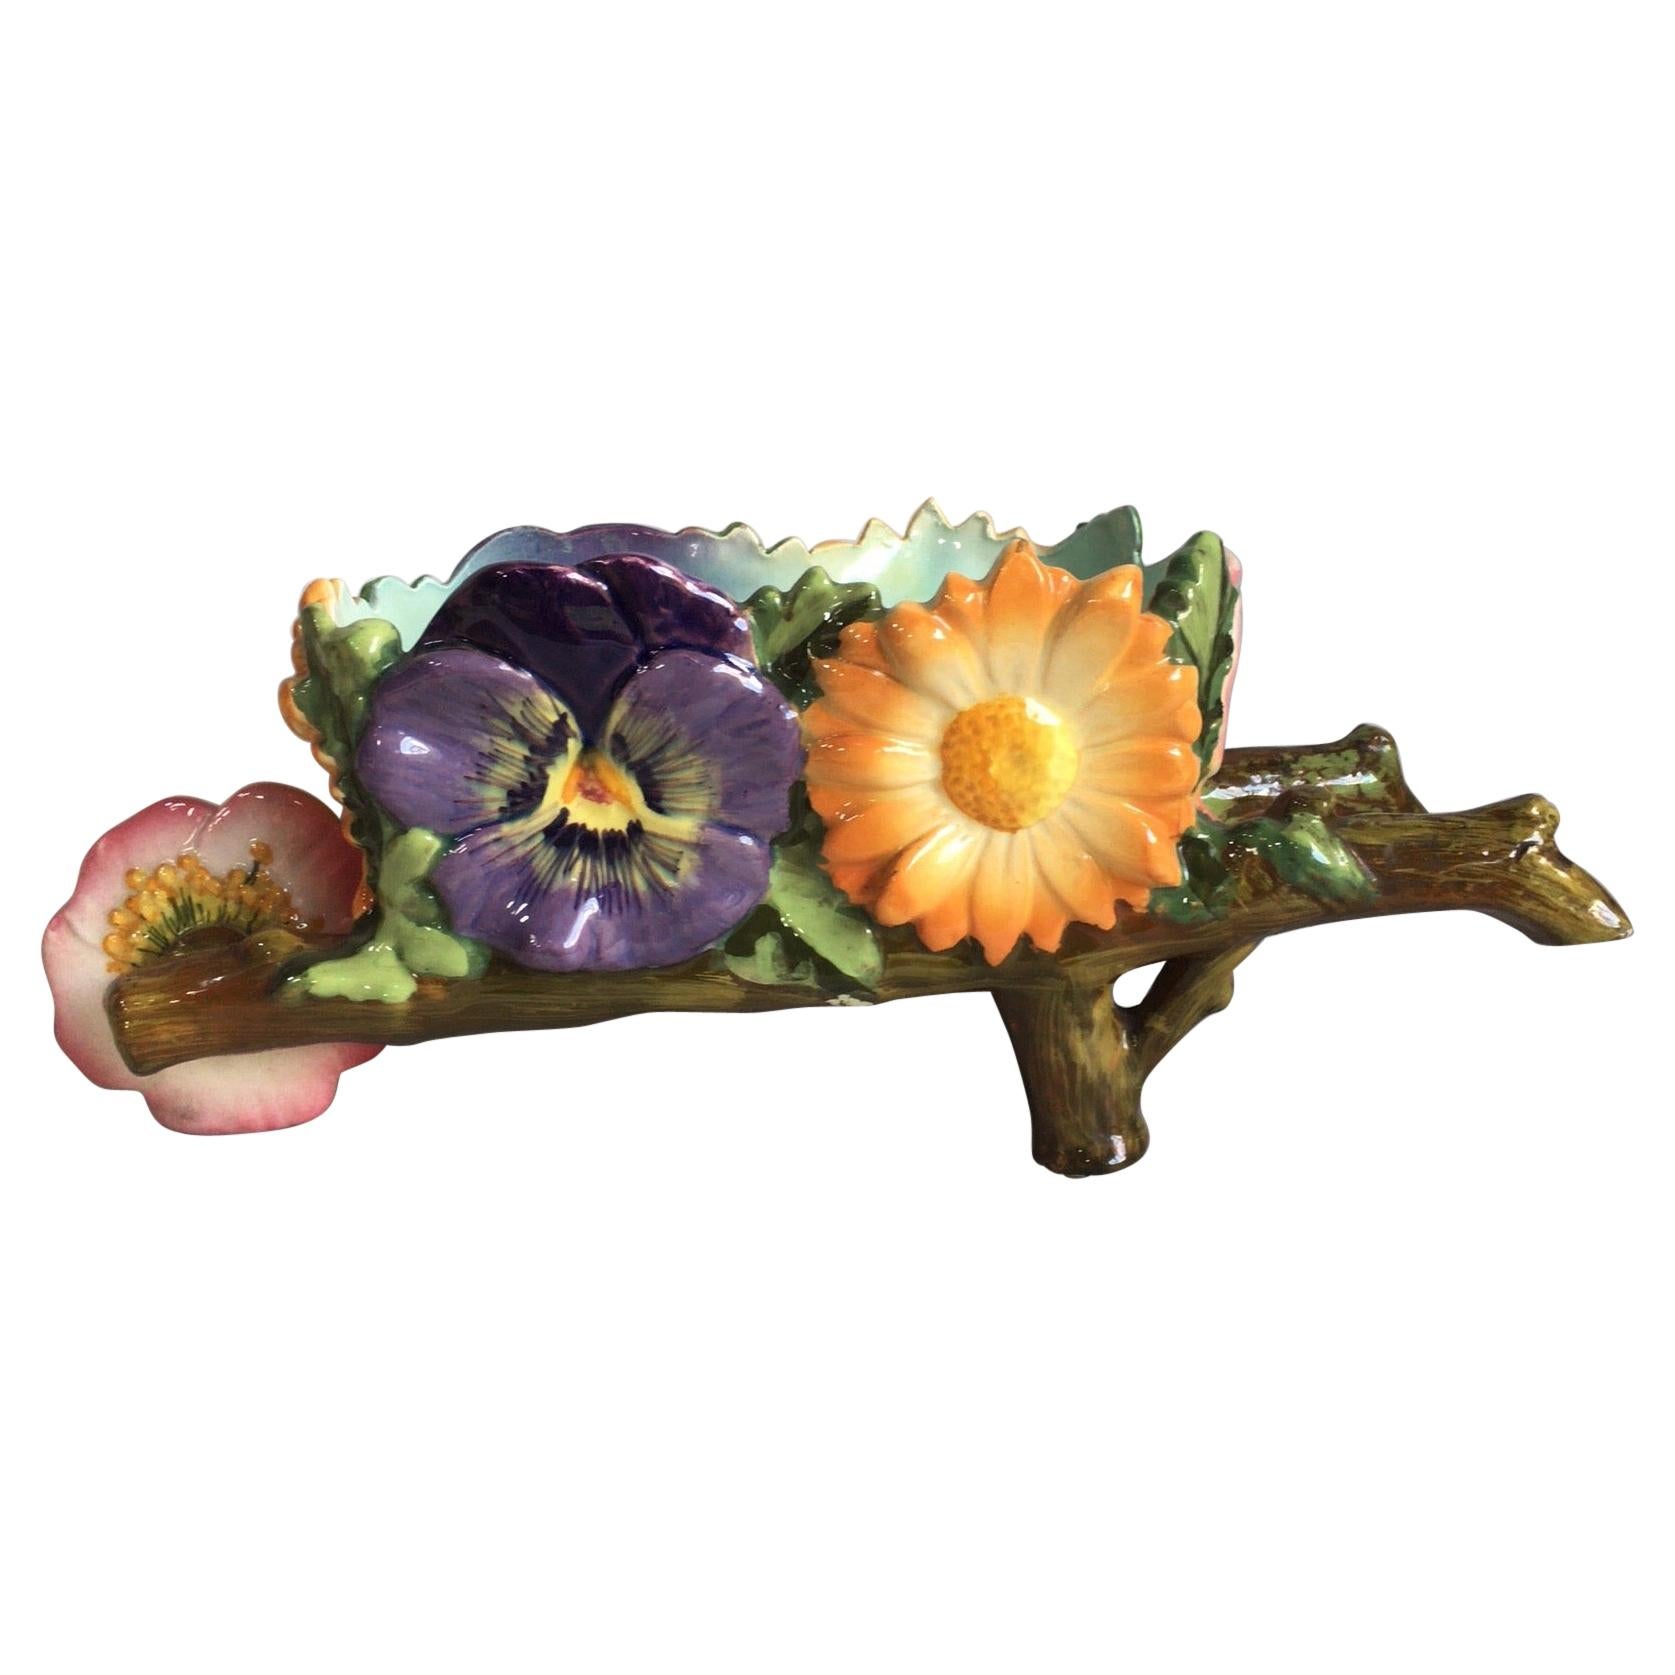 Rare large Majolica Wheelbarrow signed Delphin Massier, Circa 1890.
Pansy, sunflower, wild rose.
A very unique ceramic with lovely and vibrant colors.